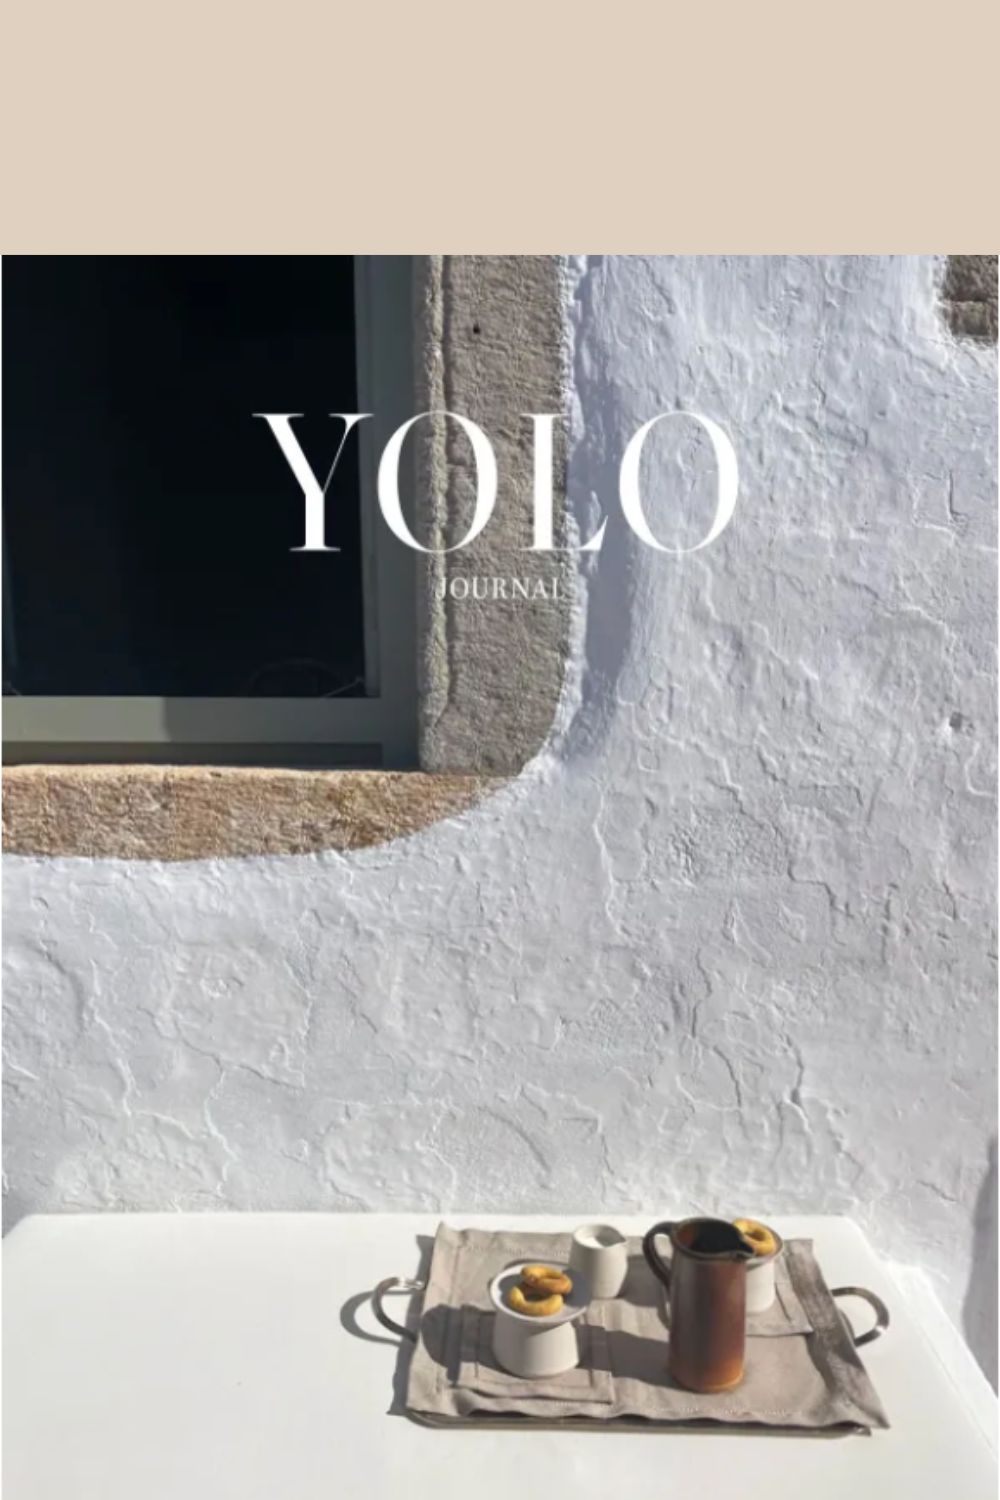 Yolo Journal Issue 11 cover